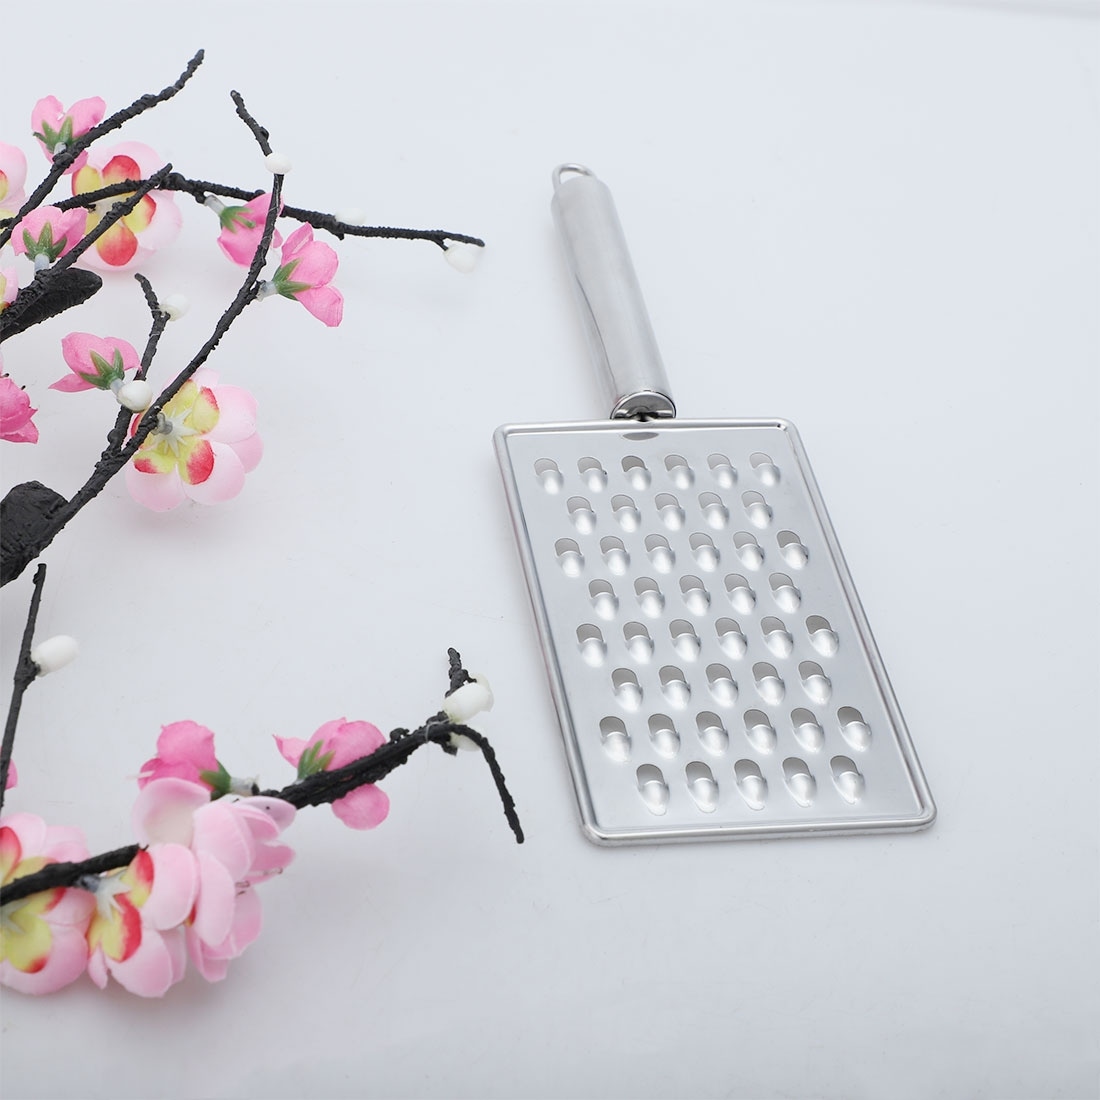 https://ak1.ostkcdn.com/images/products/is/images/direct/7a91a848cbecc6eaf40419b08418a7d7316636ba/Stainless-Steel-Cheese-Grater-Fruit-Vegetable-Grater-for-Kitchen-Restaurant.jpg